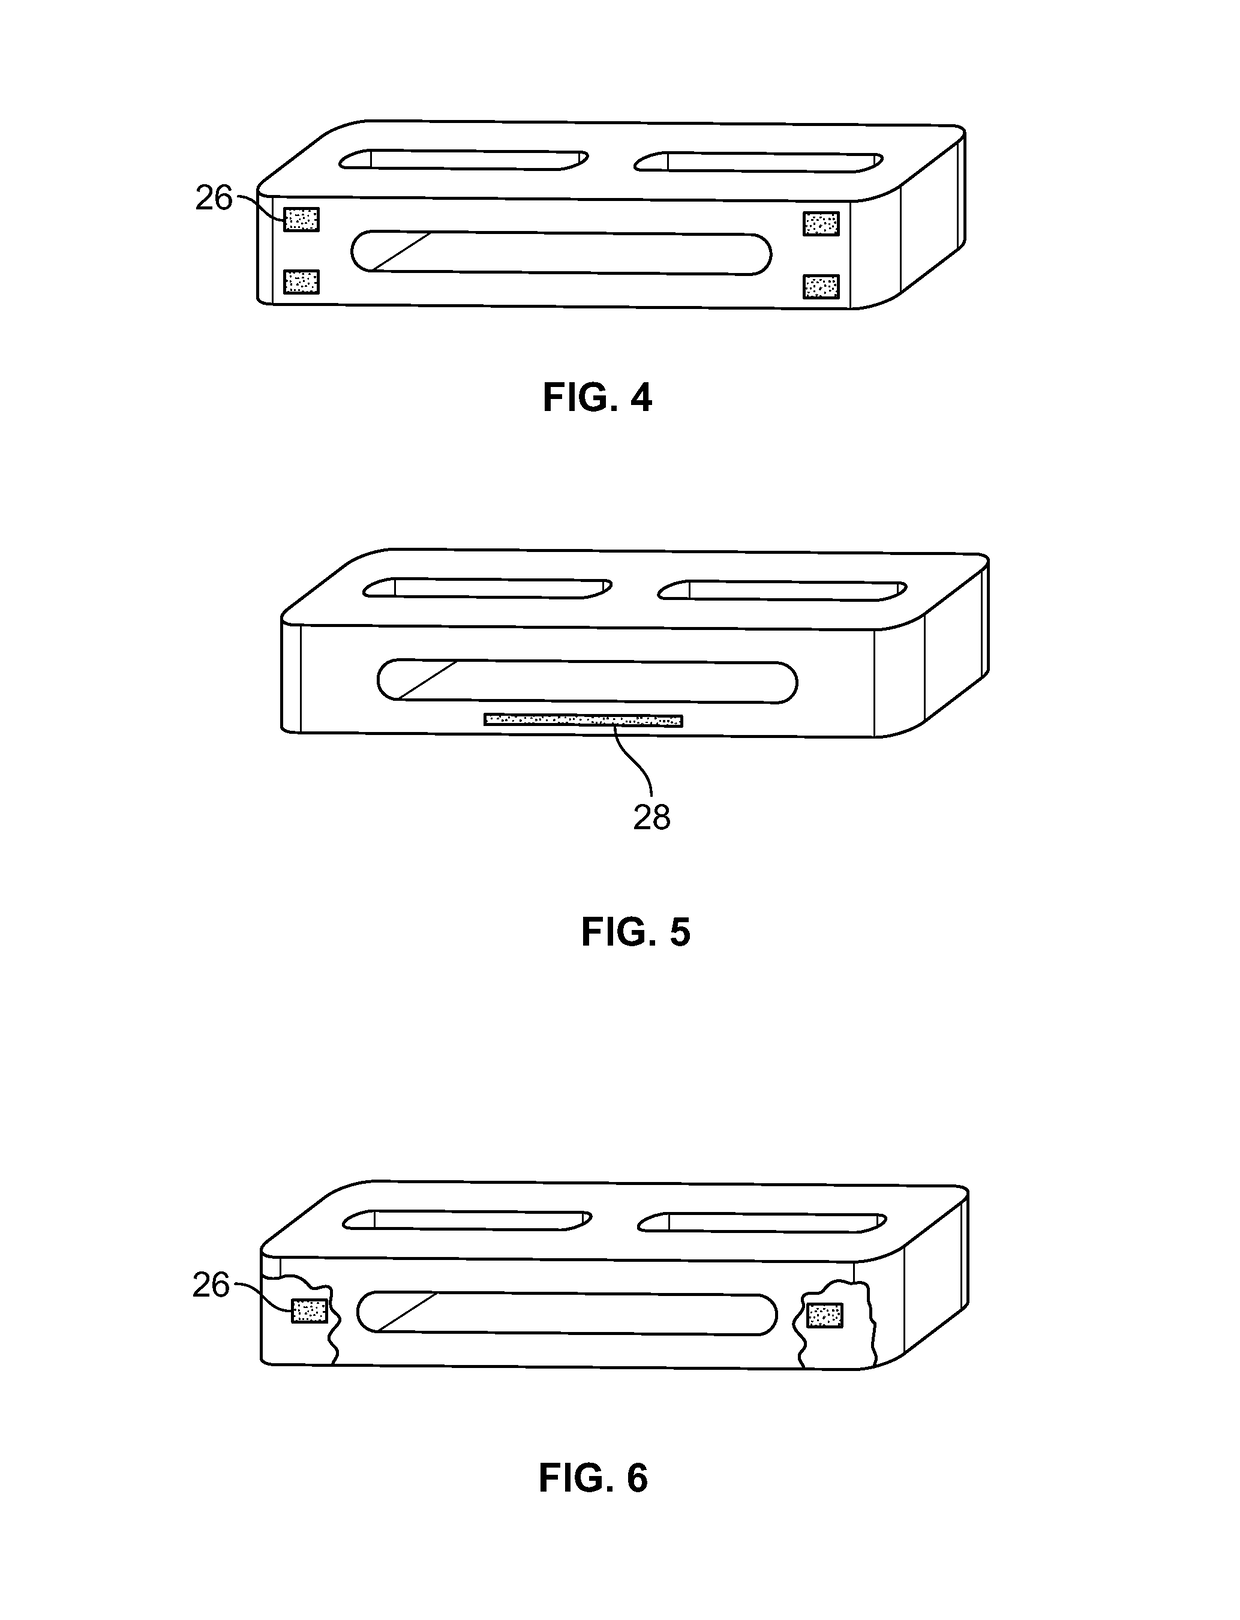 Magnetically connectable interbody spinal implant devices